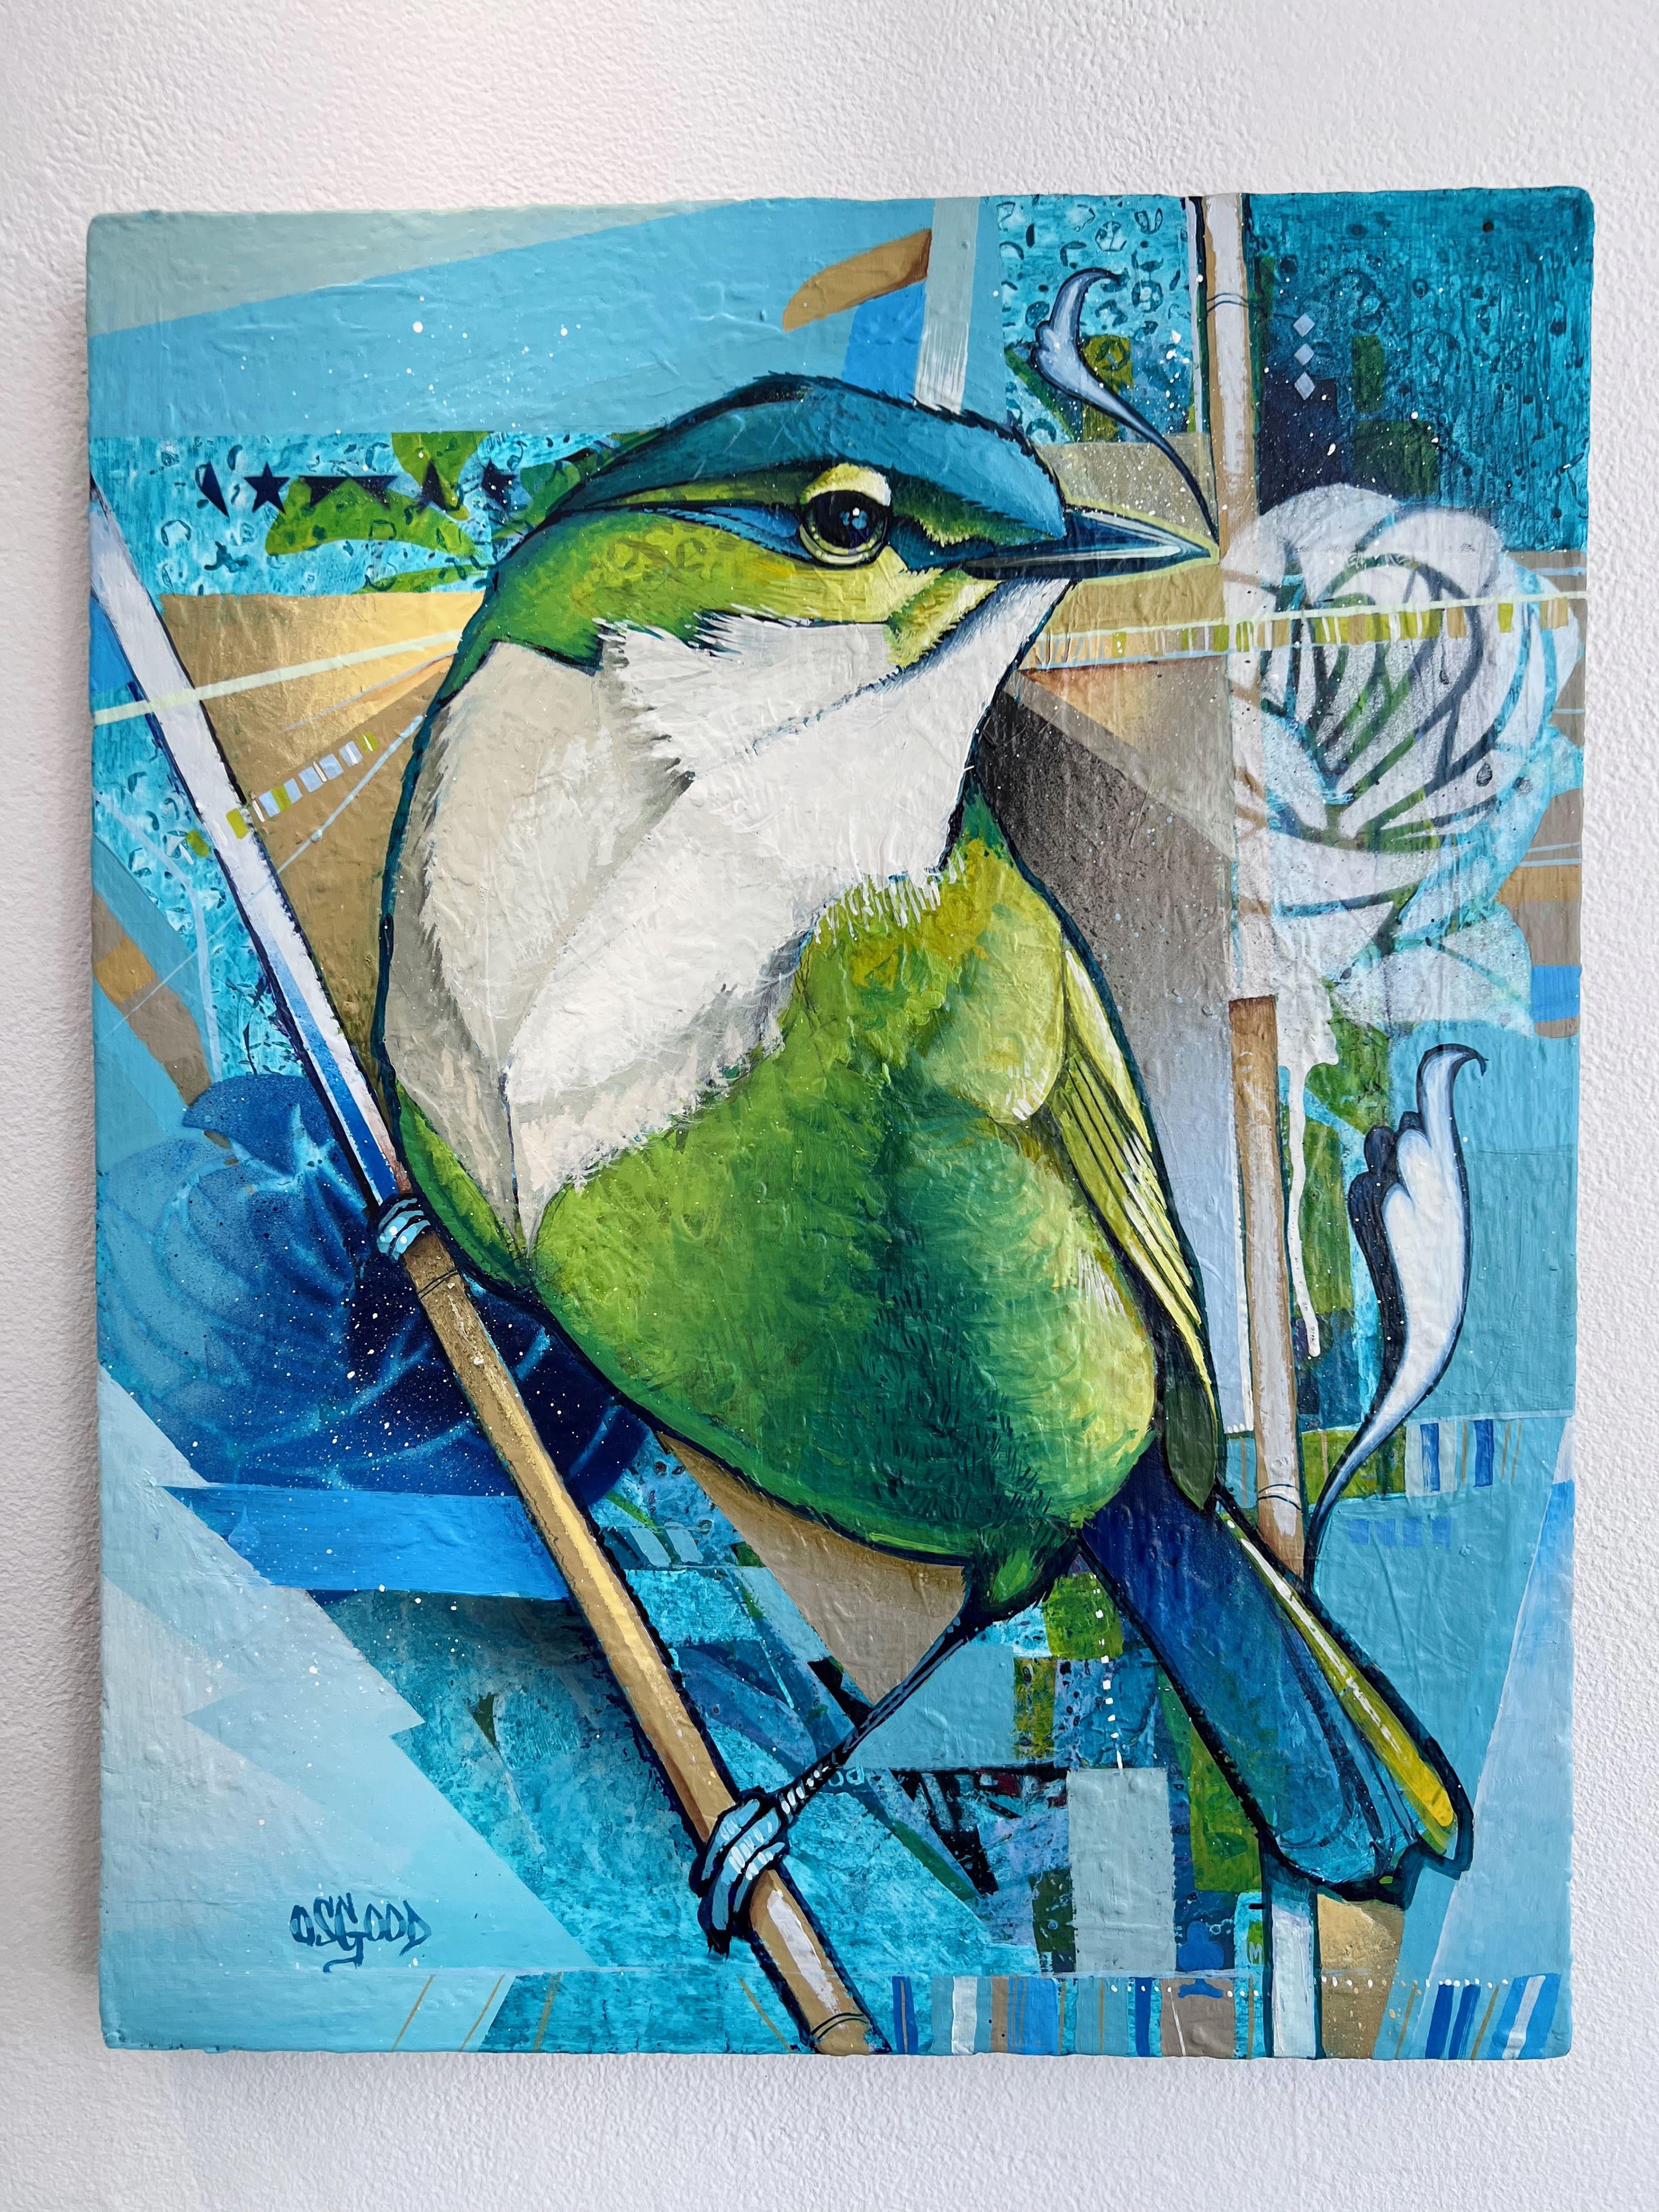 'Directional Intent' is an original bird painting by contemporary urban artist John Osgood. The artwork combines a mixture of acrylic paints, aerosol, and oil on a canvas. It measures 20 x 16 inches and is signed by the artist on the lower left.

In